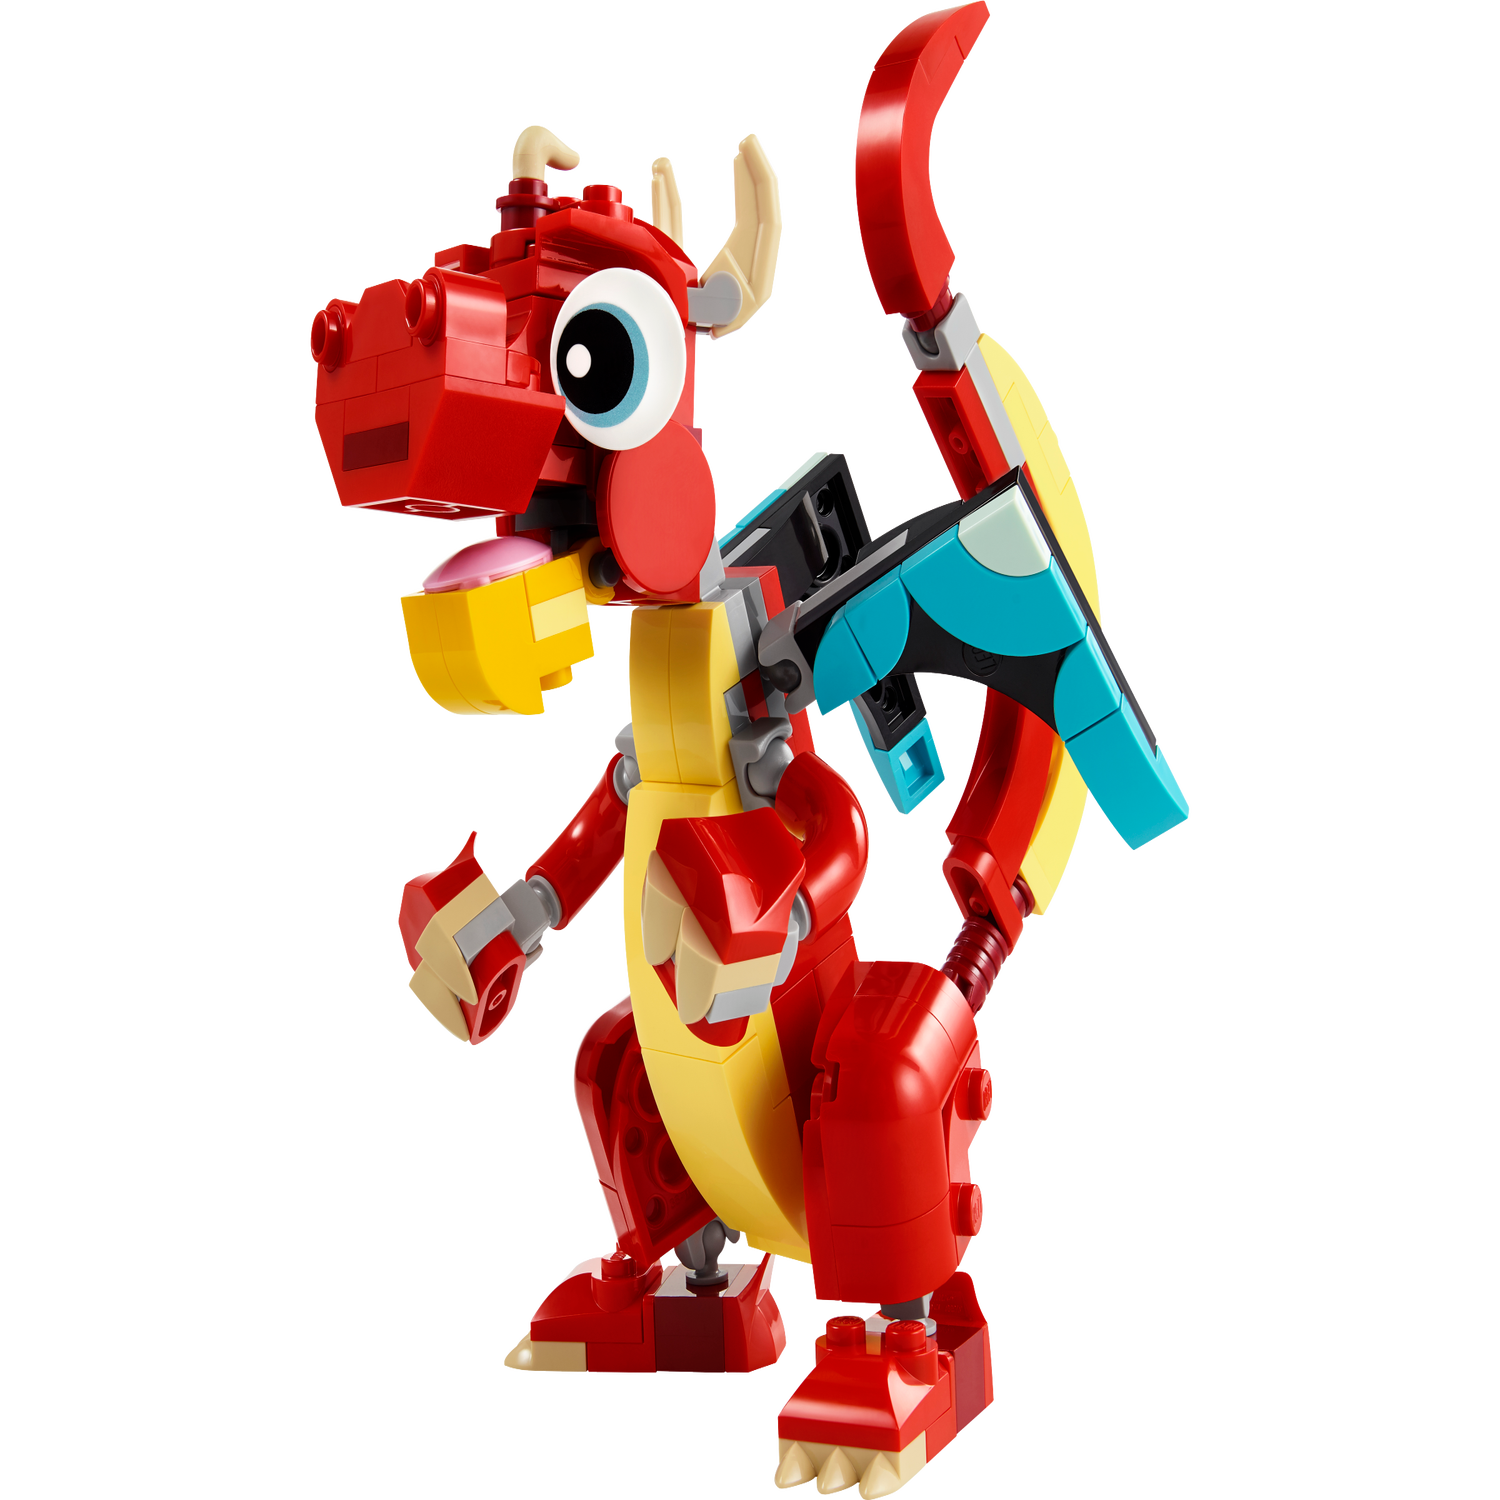 LEGO Creator 3 in 1 Red Dragon 3 in 1 Animal Toy Set 31145 6470618